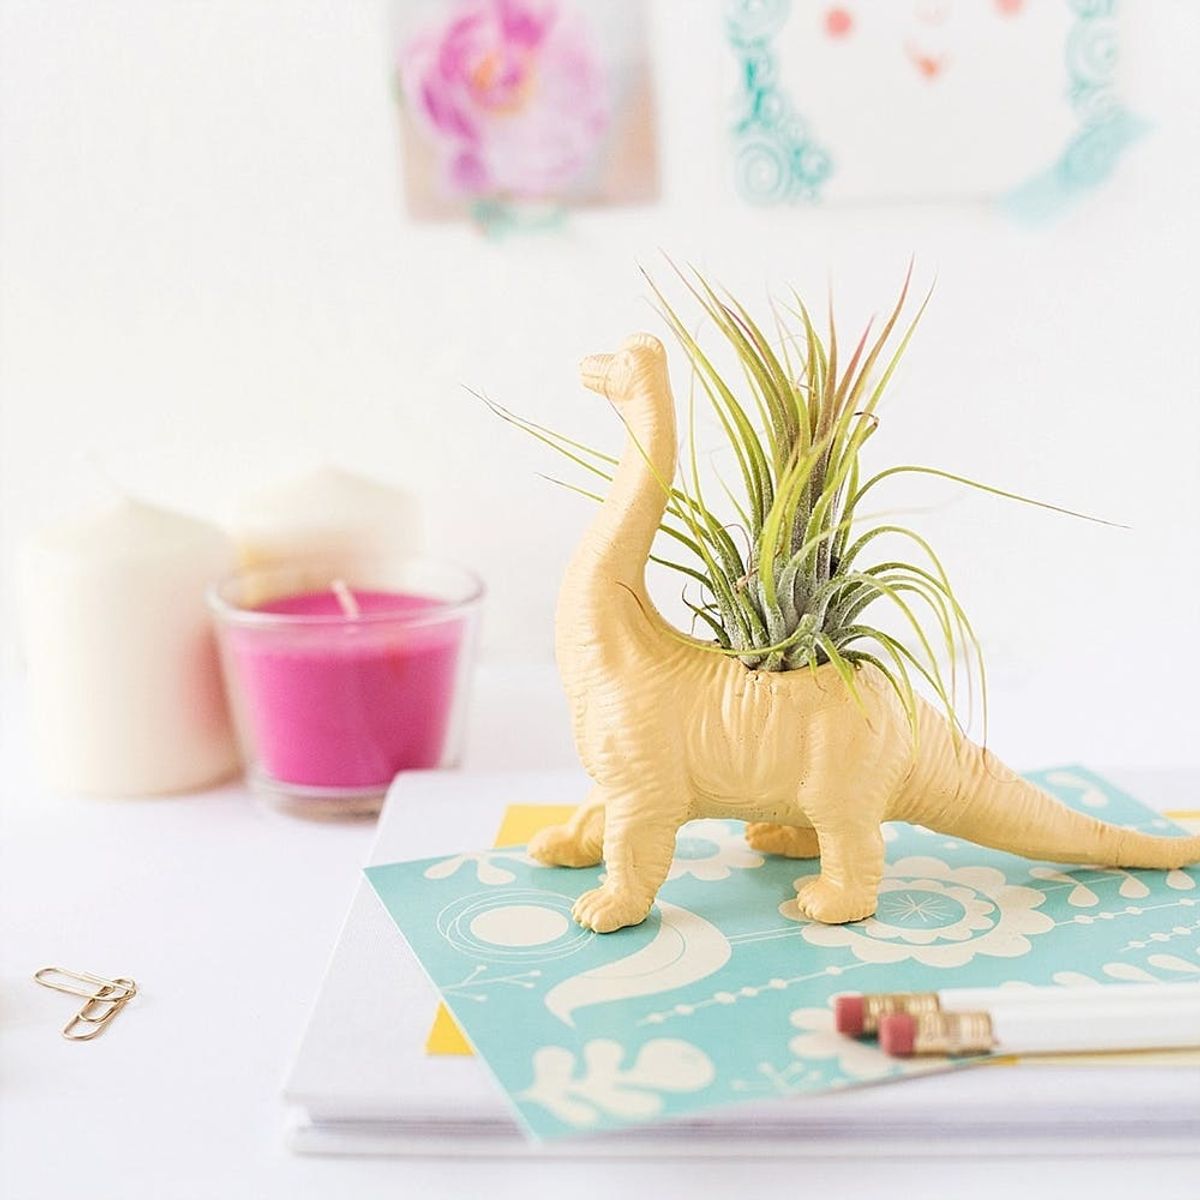 Liven Up Your Workspace With This DIY Dino Planter